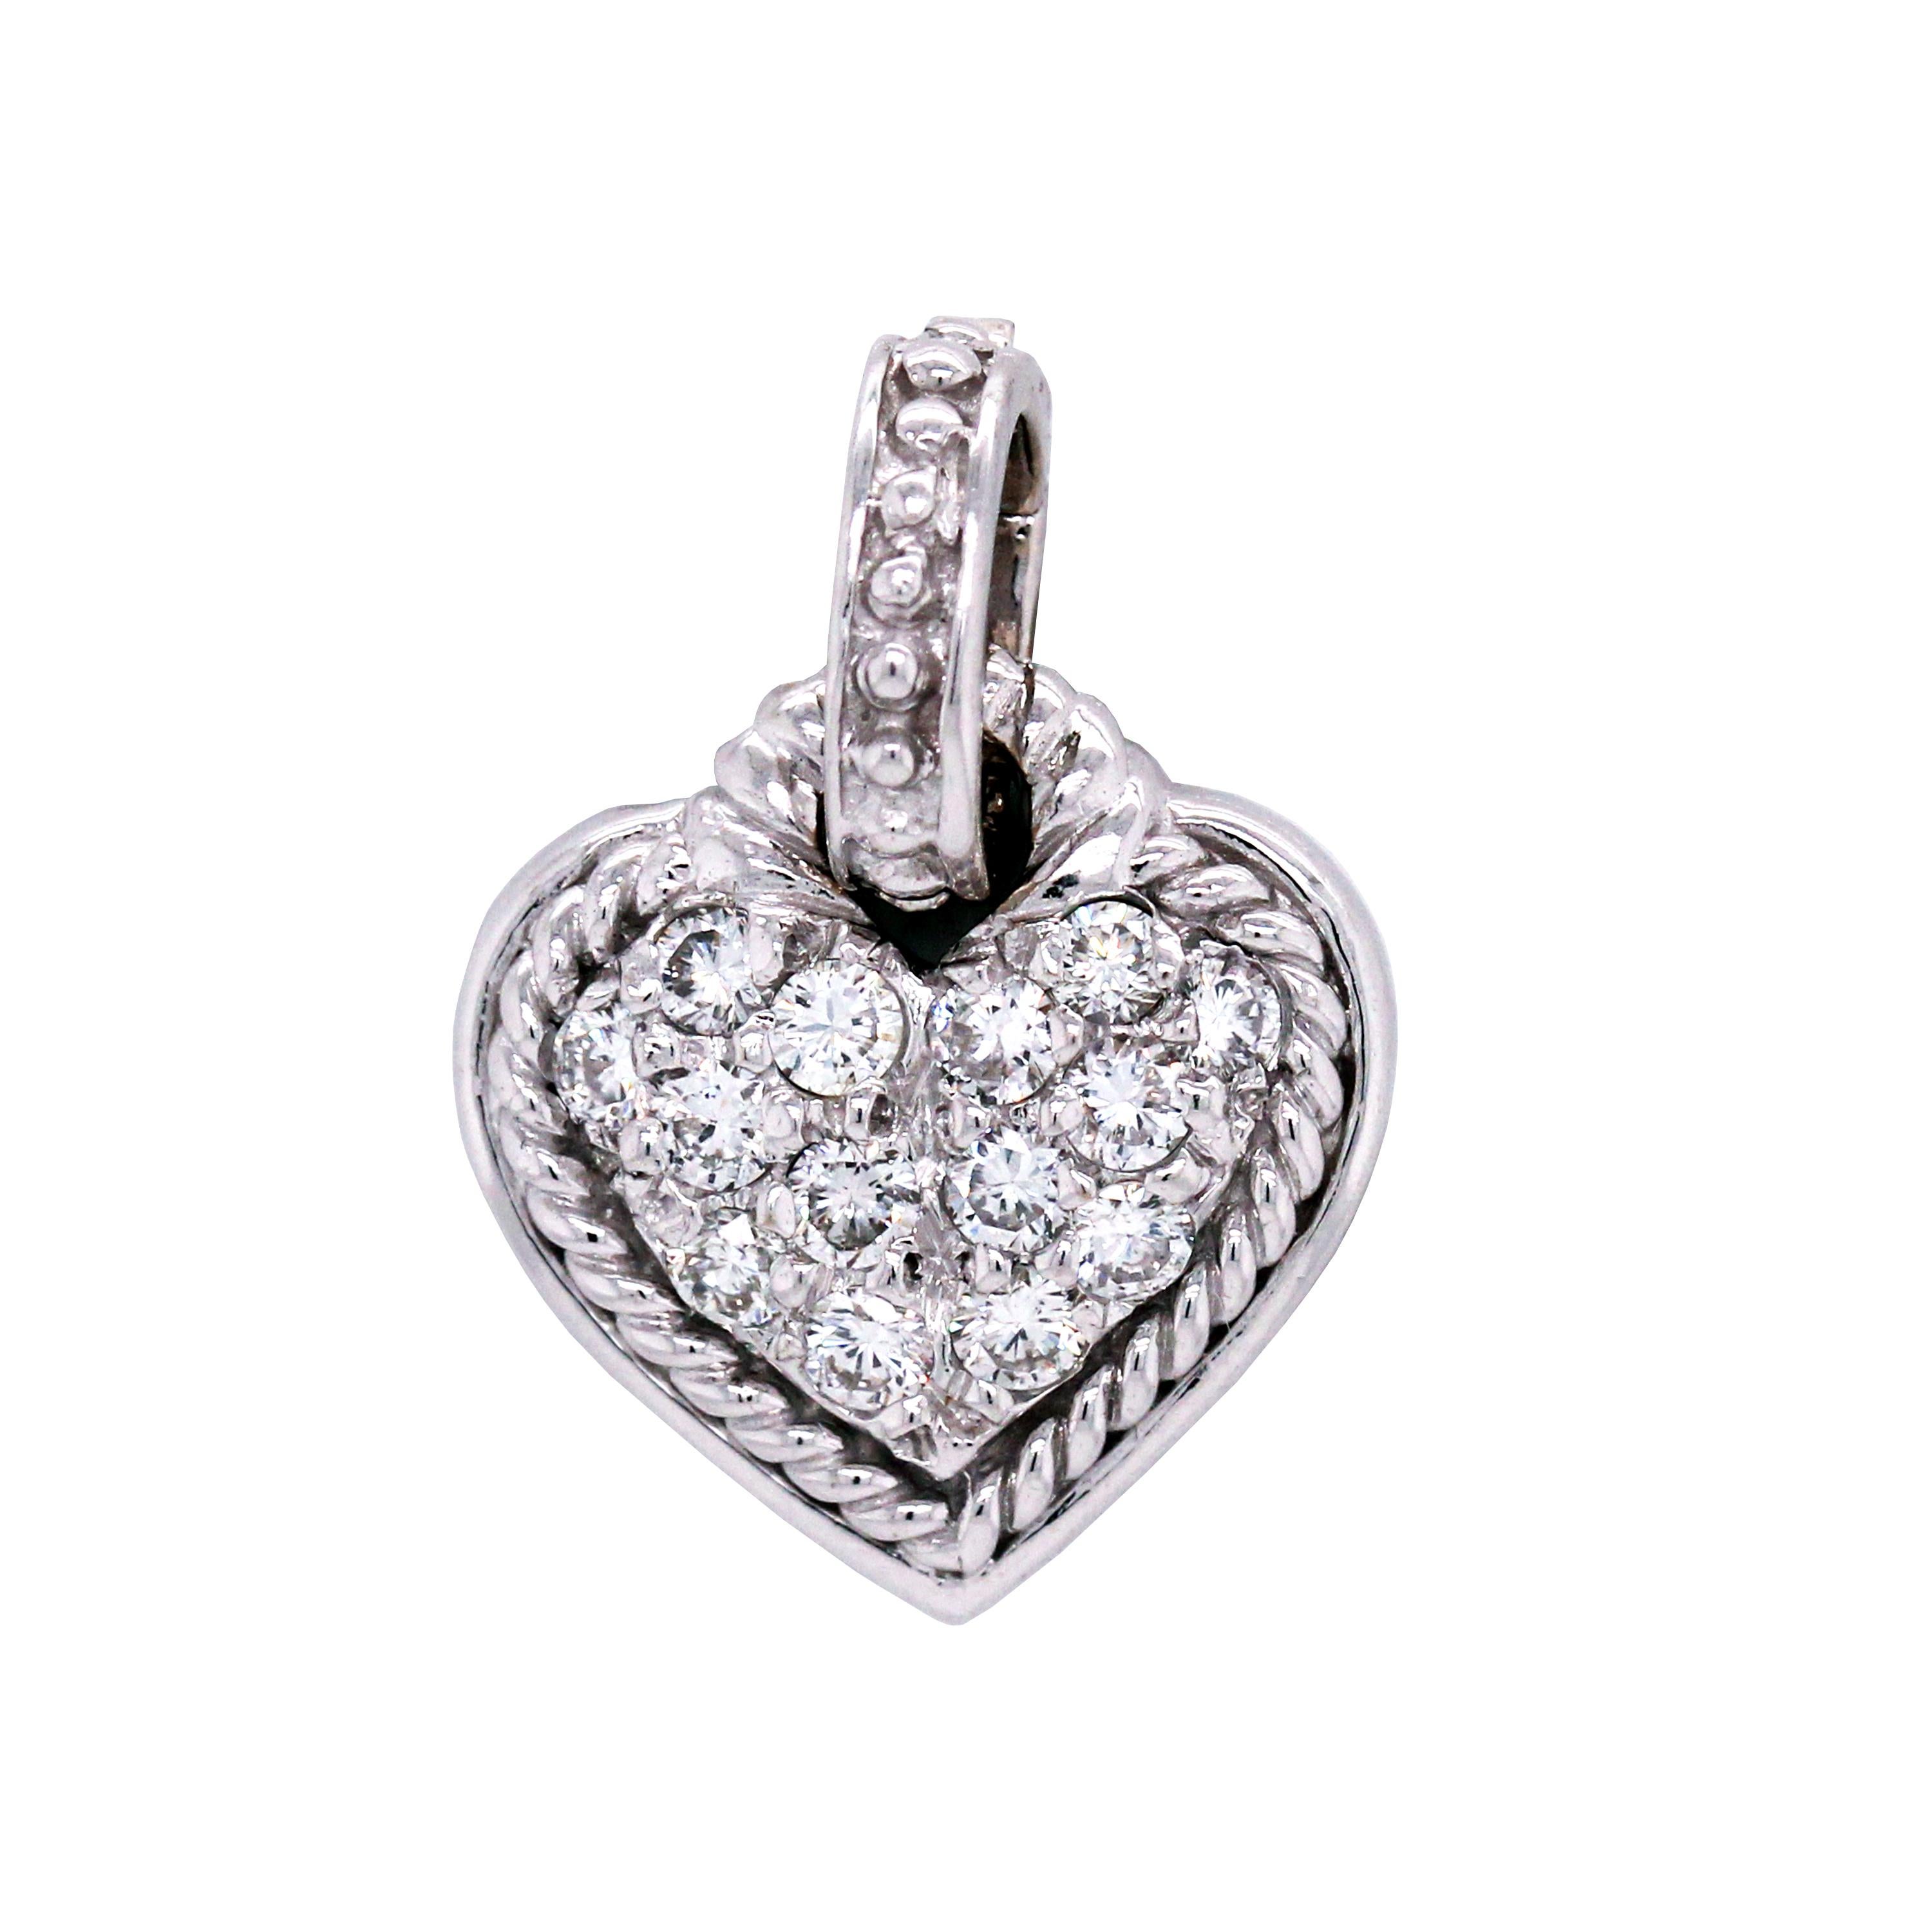 Judith Ripka 18K White Gold and Diamond Heart Pendant with Handmade Chain

This cute heart charm pendant has diamonds and is hung on a 18K white gold handmade chain with diamonds. There are two bezels with diamonds

1 carat apprx. G color, VS